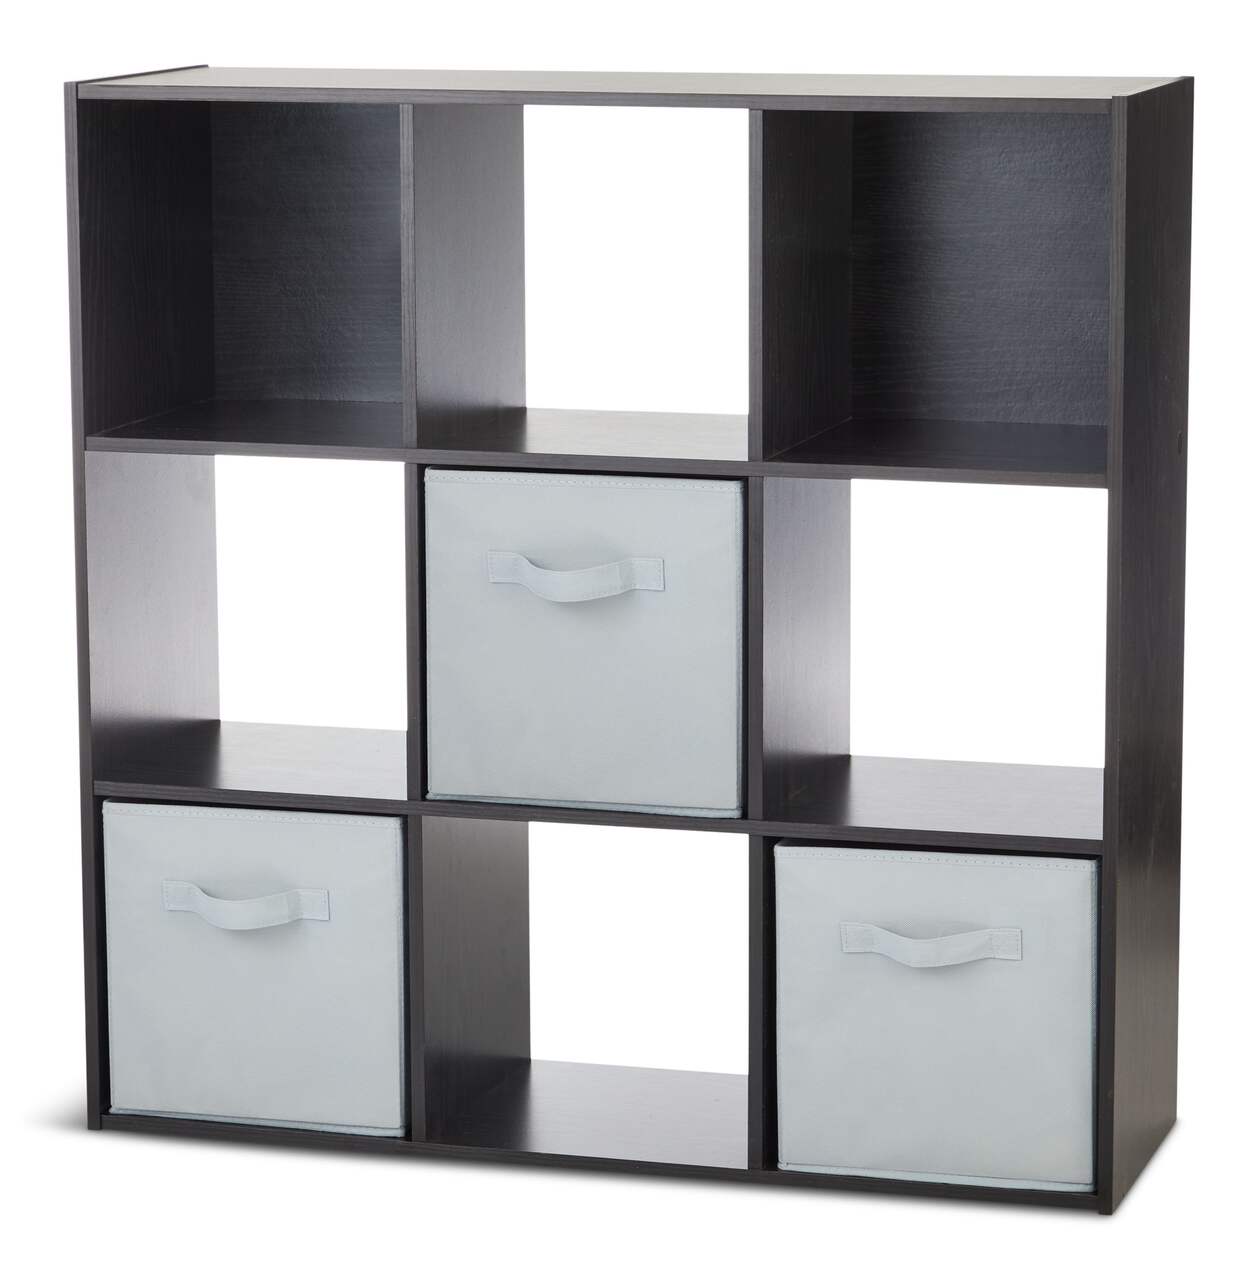 https://media-www.canadiantire.ca/product/living/home-decor/furniture/0680400/for-living-9-cube-cabinet-black-oak-e6ac1085-2735-4a4c-b867-82b616102247-jpgrendition.jpg?imdensity=1&imwidth=640&impolicy=mZoom